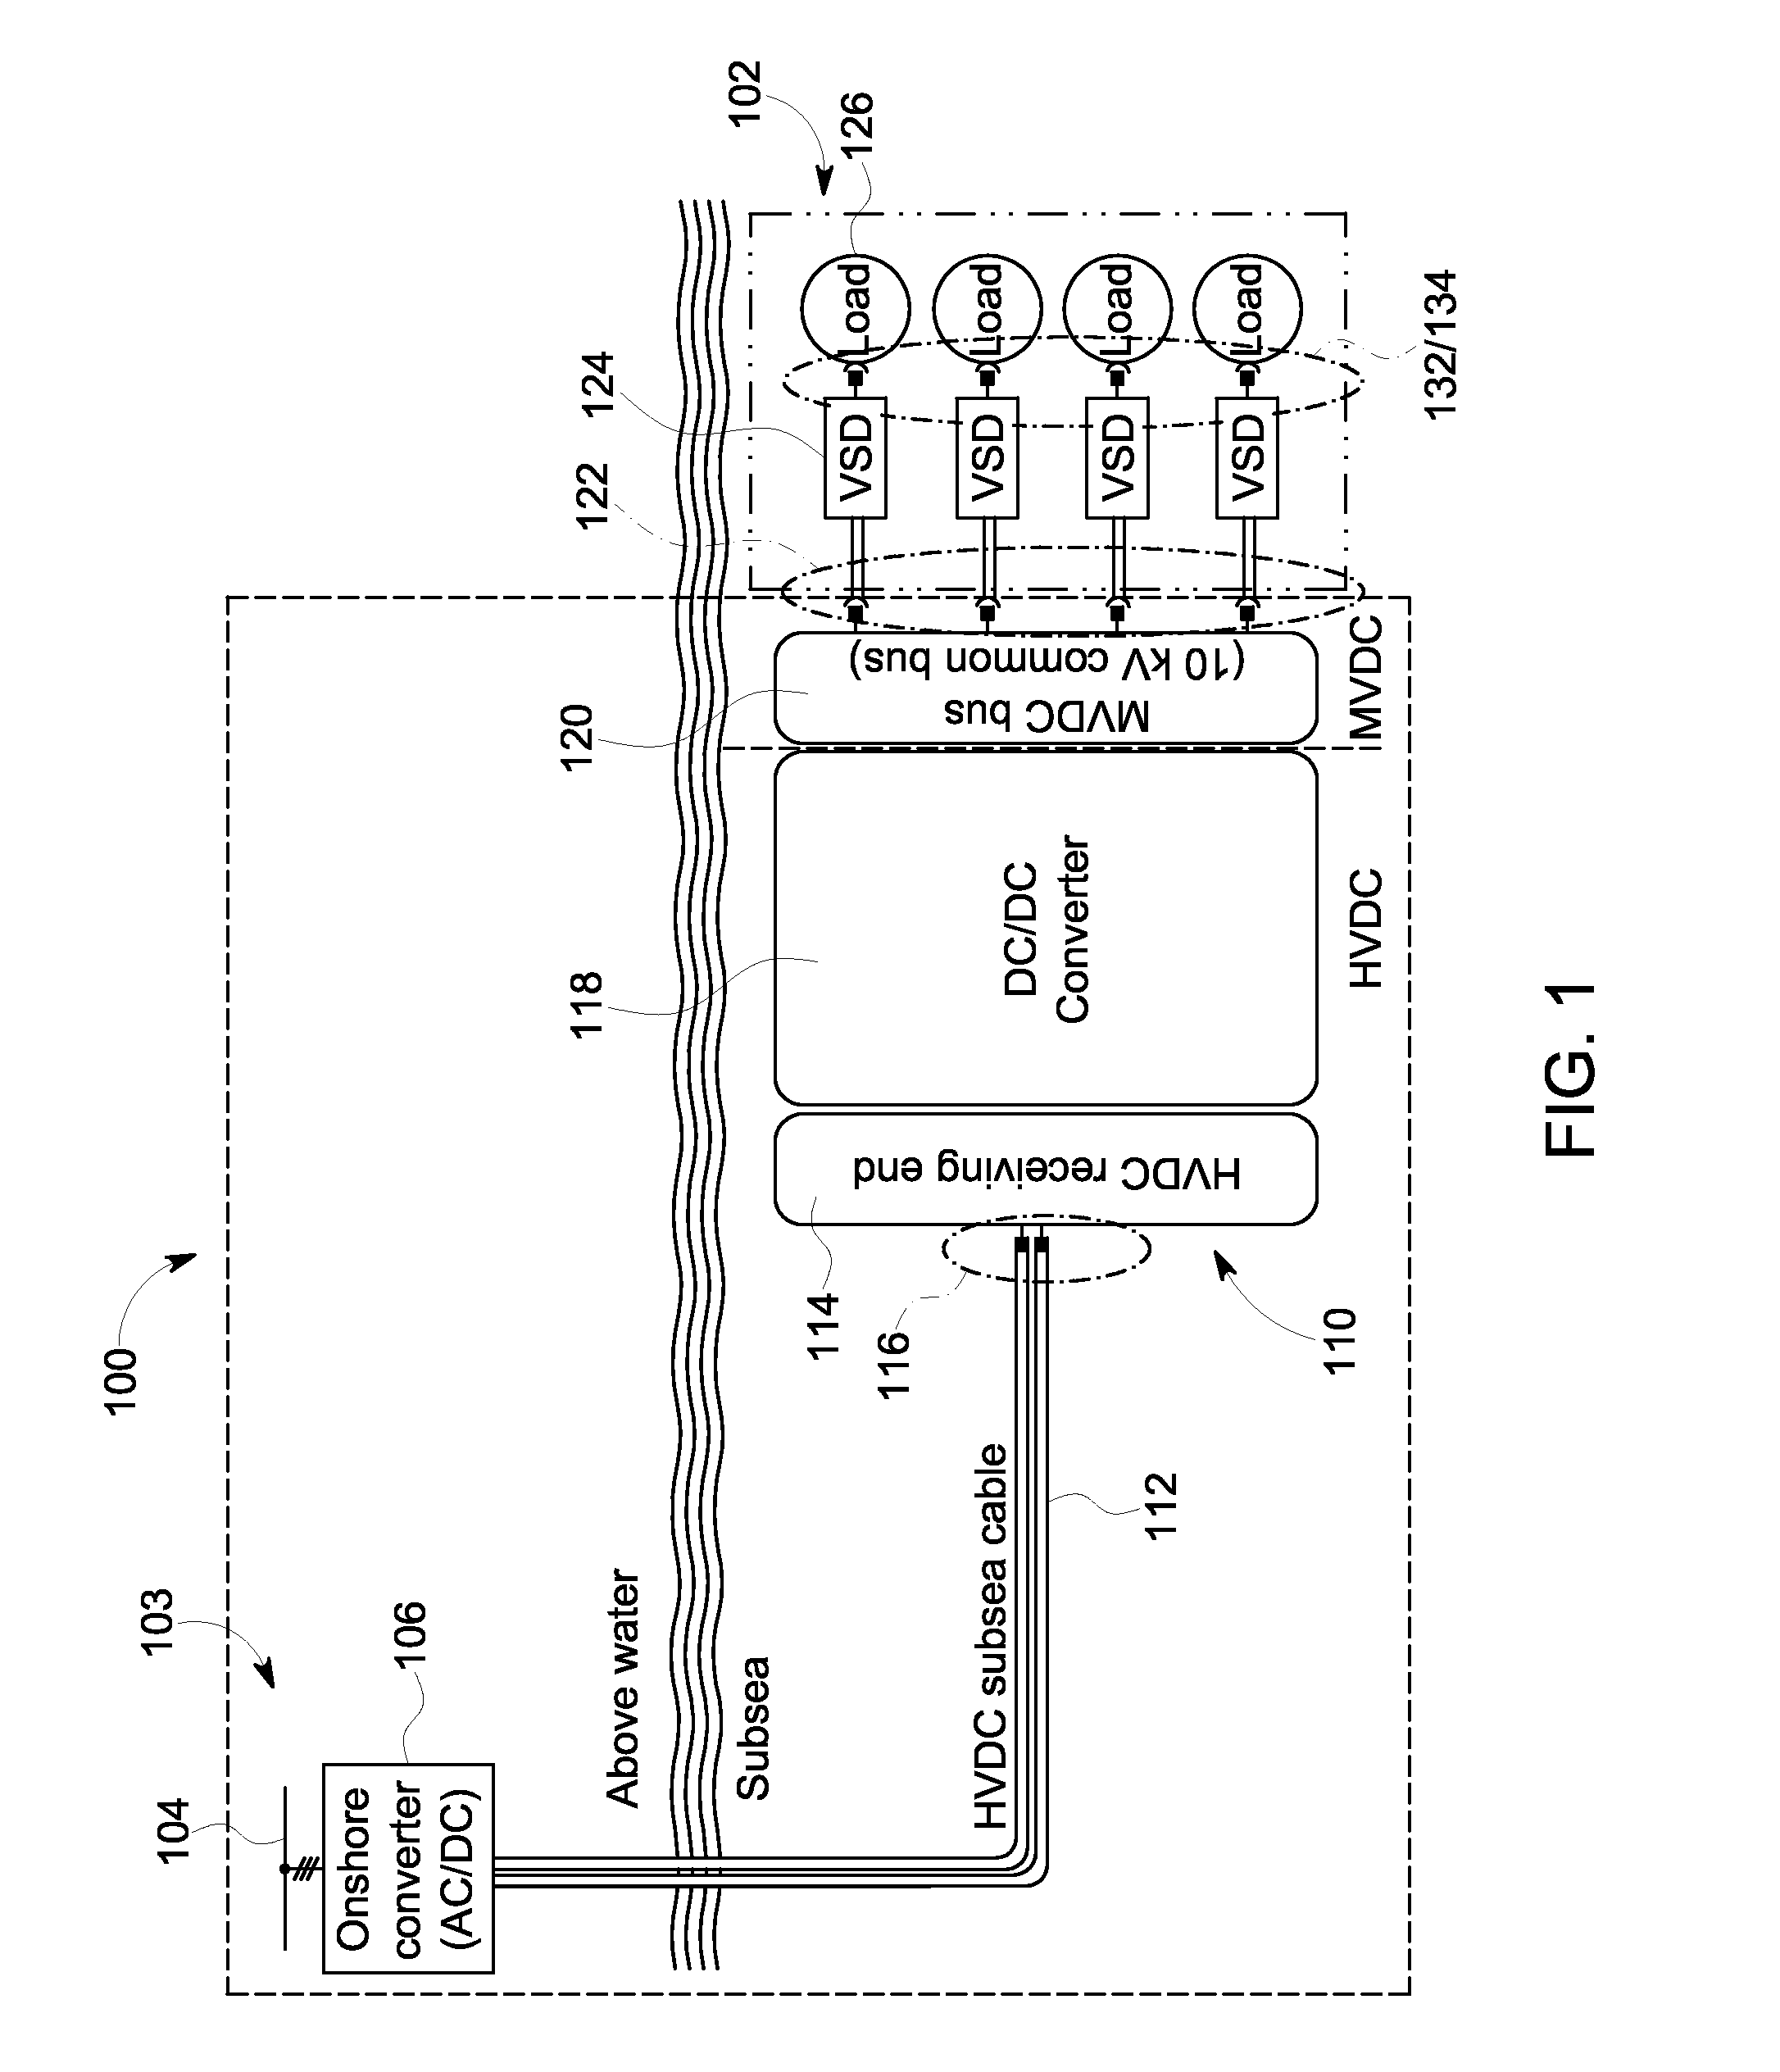 Methods and systems for subsea direct current power distribution